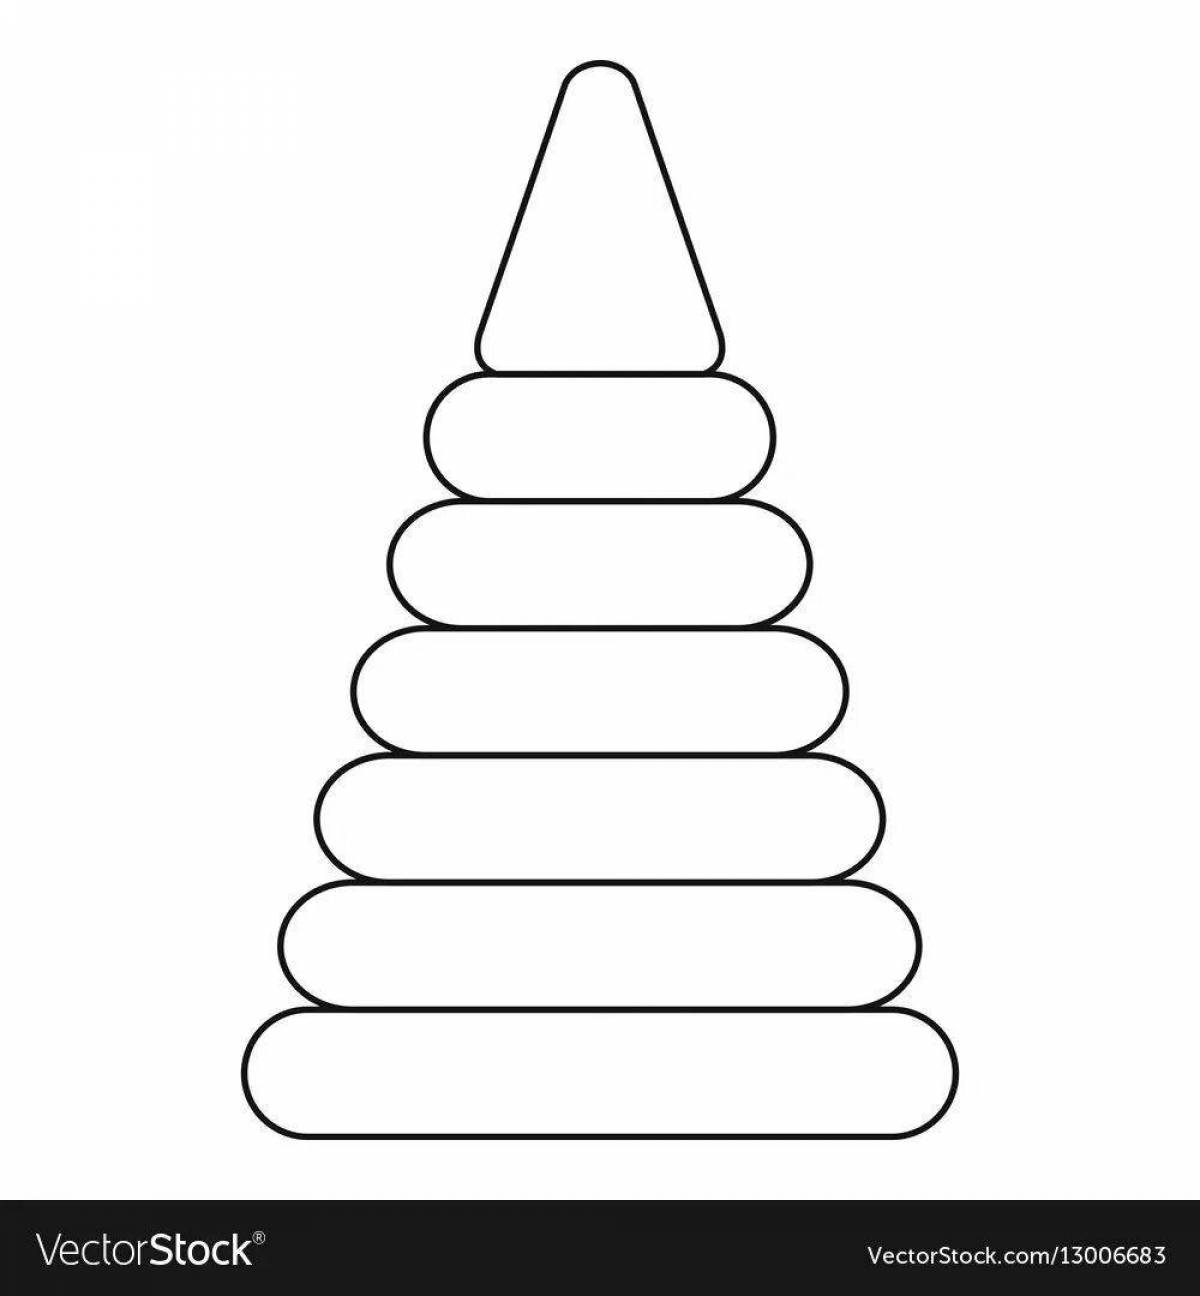 Pyramid picture for kids #12